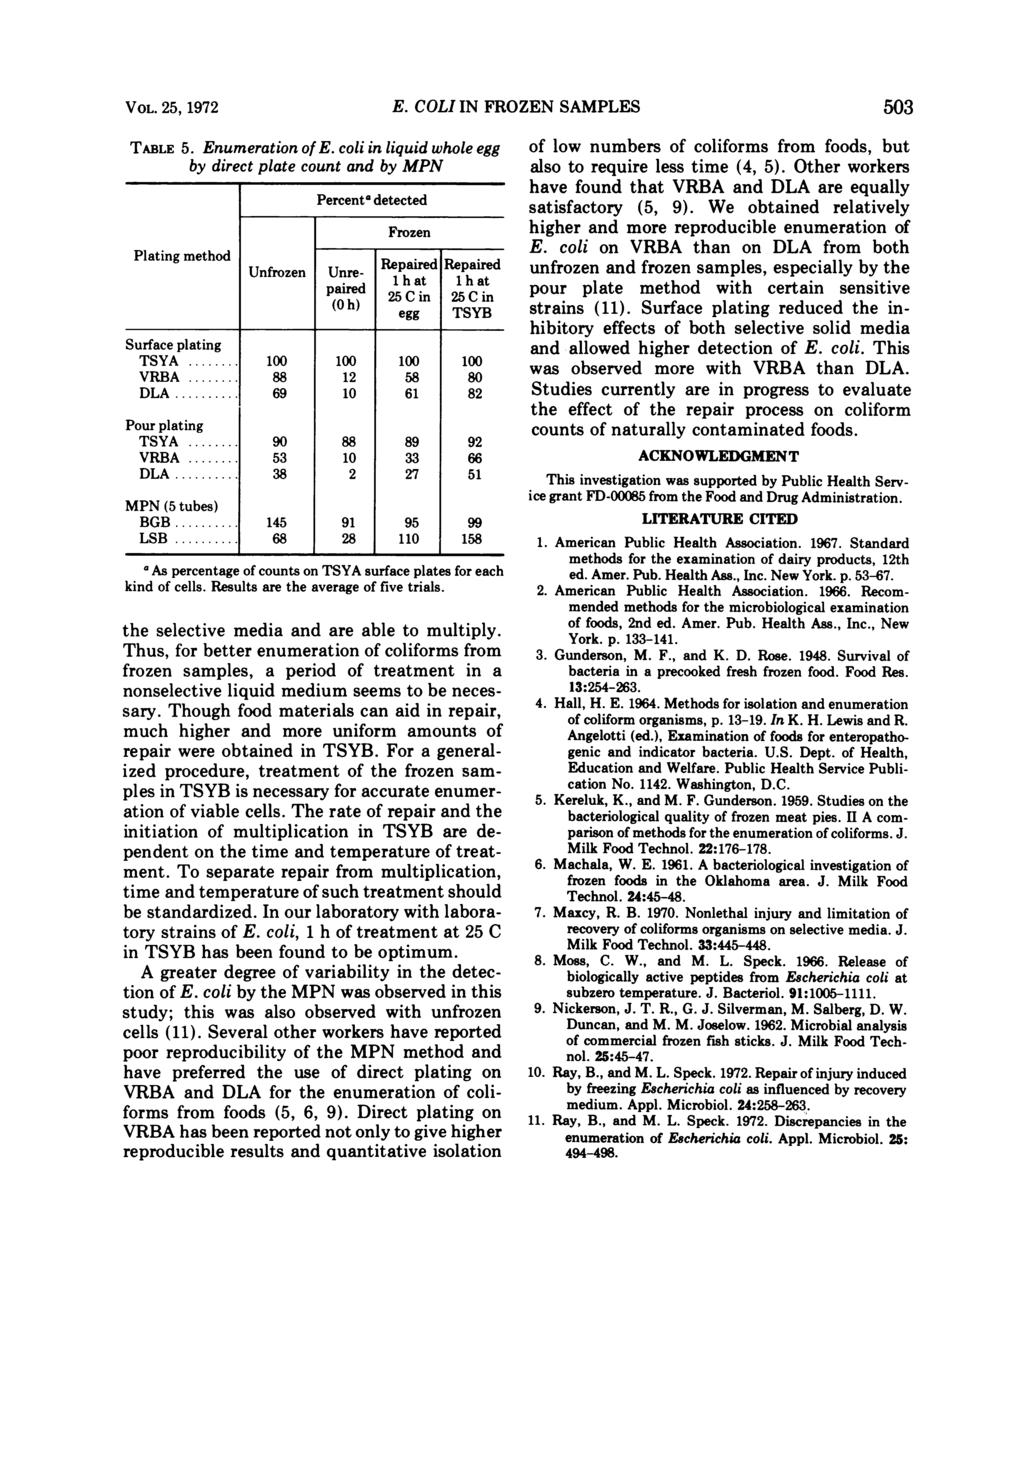 VOL. 25, 1972 TABLE 5. Enumeration of E. coli in liquid whole egg by direct plate count and by MPN Percenta detected E.